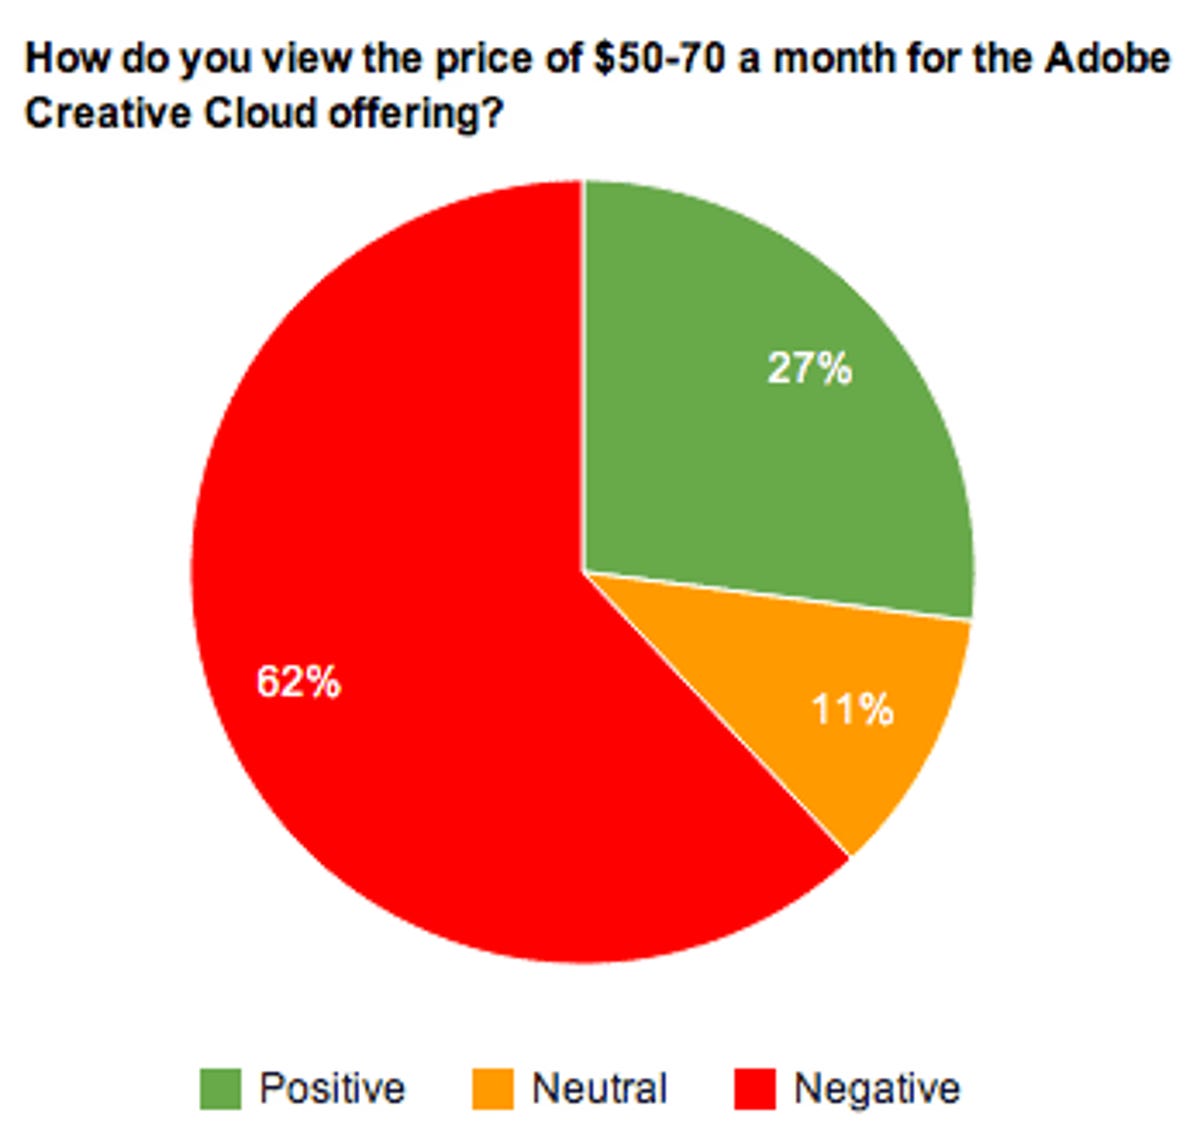 Adobe must convince people that Creative Cloud is a good value for the money.